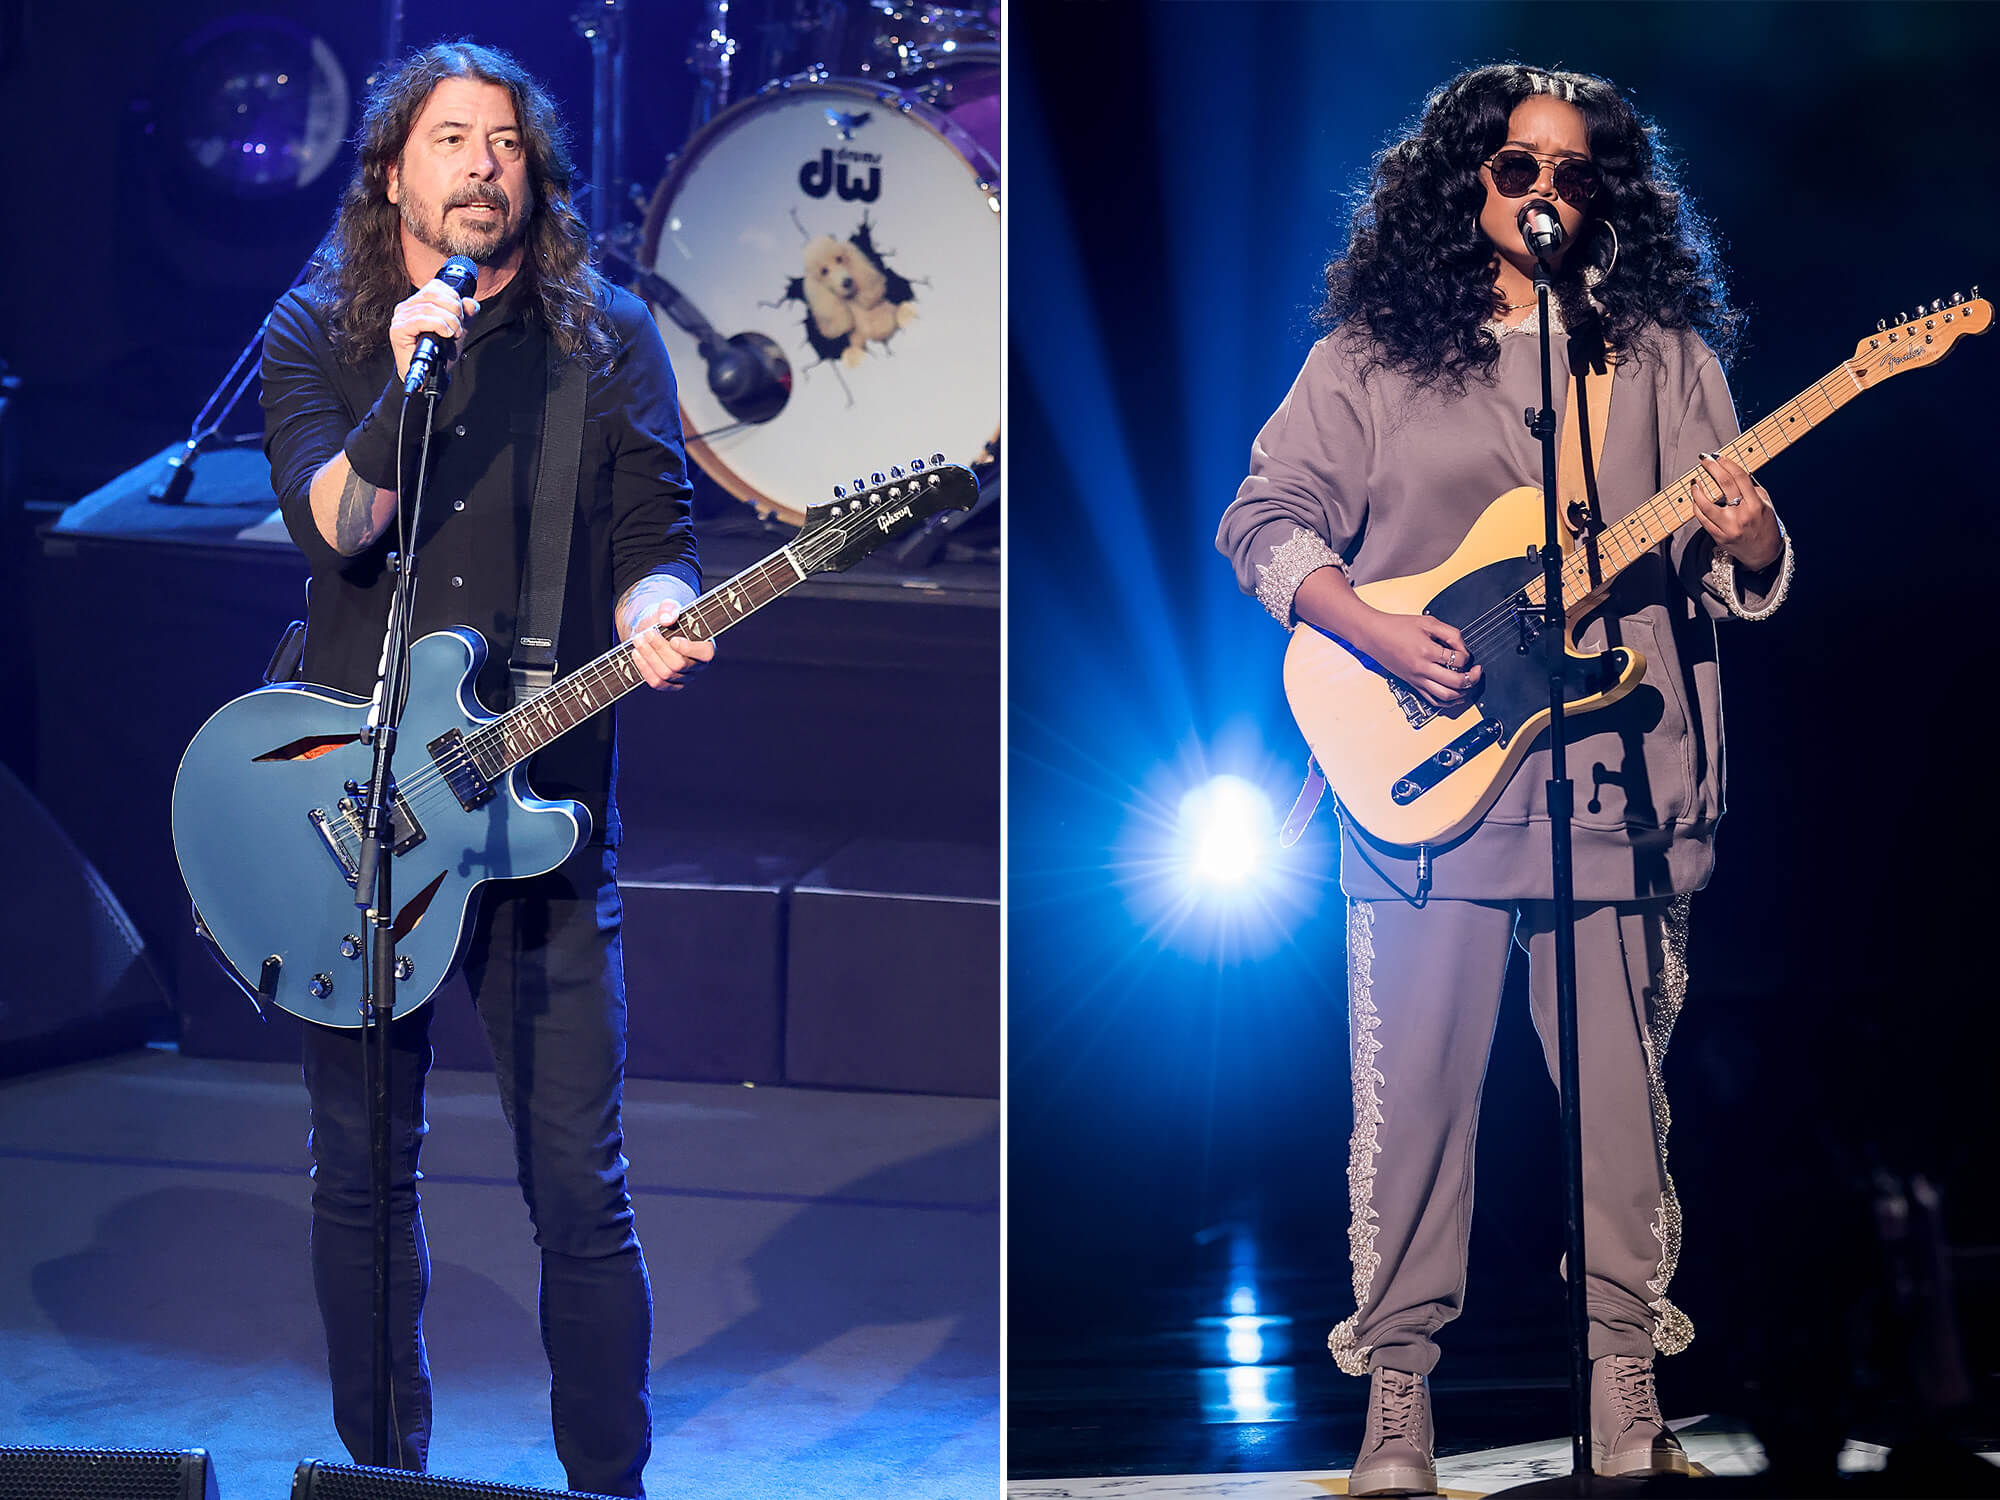 Left - Dave Grohl of Foo Fighters holding a mic stand in one hand and his guitar in the other. He has long hair and a beard and is looking out slightly to his left across the crowd. Right - H.E.R. playing guitar and singing into a mic. She wears sunglasses and has long, dark hair.